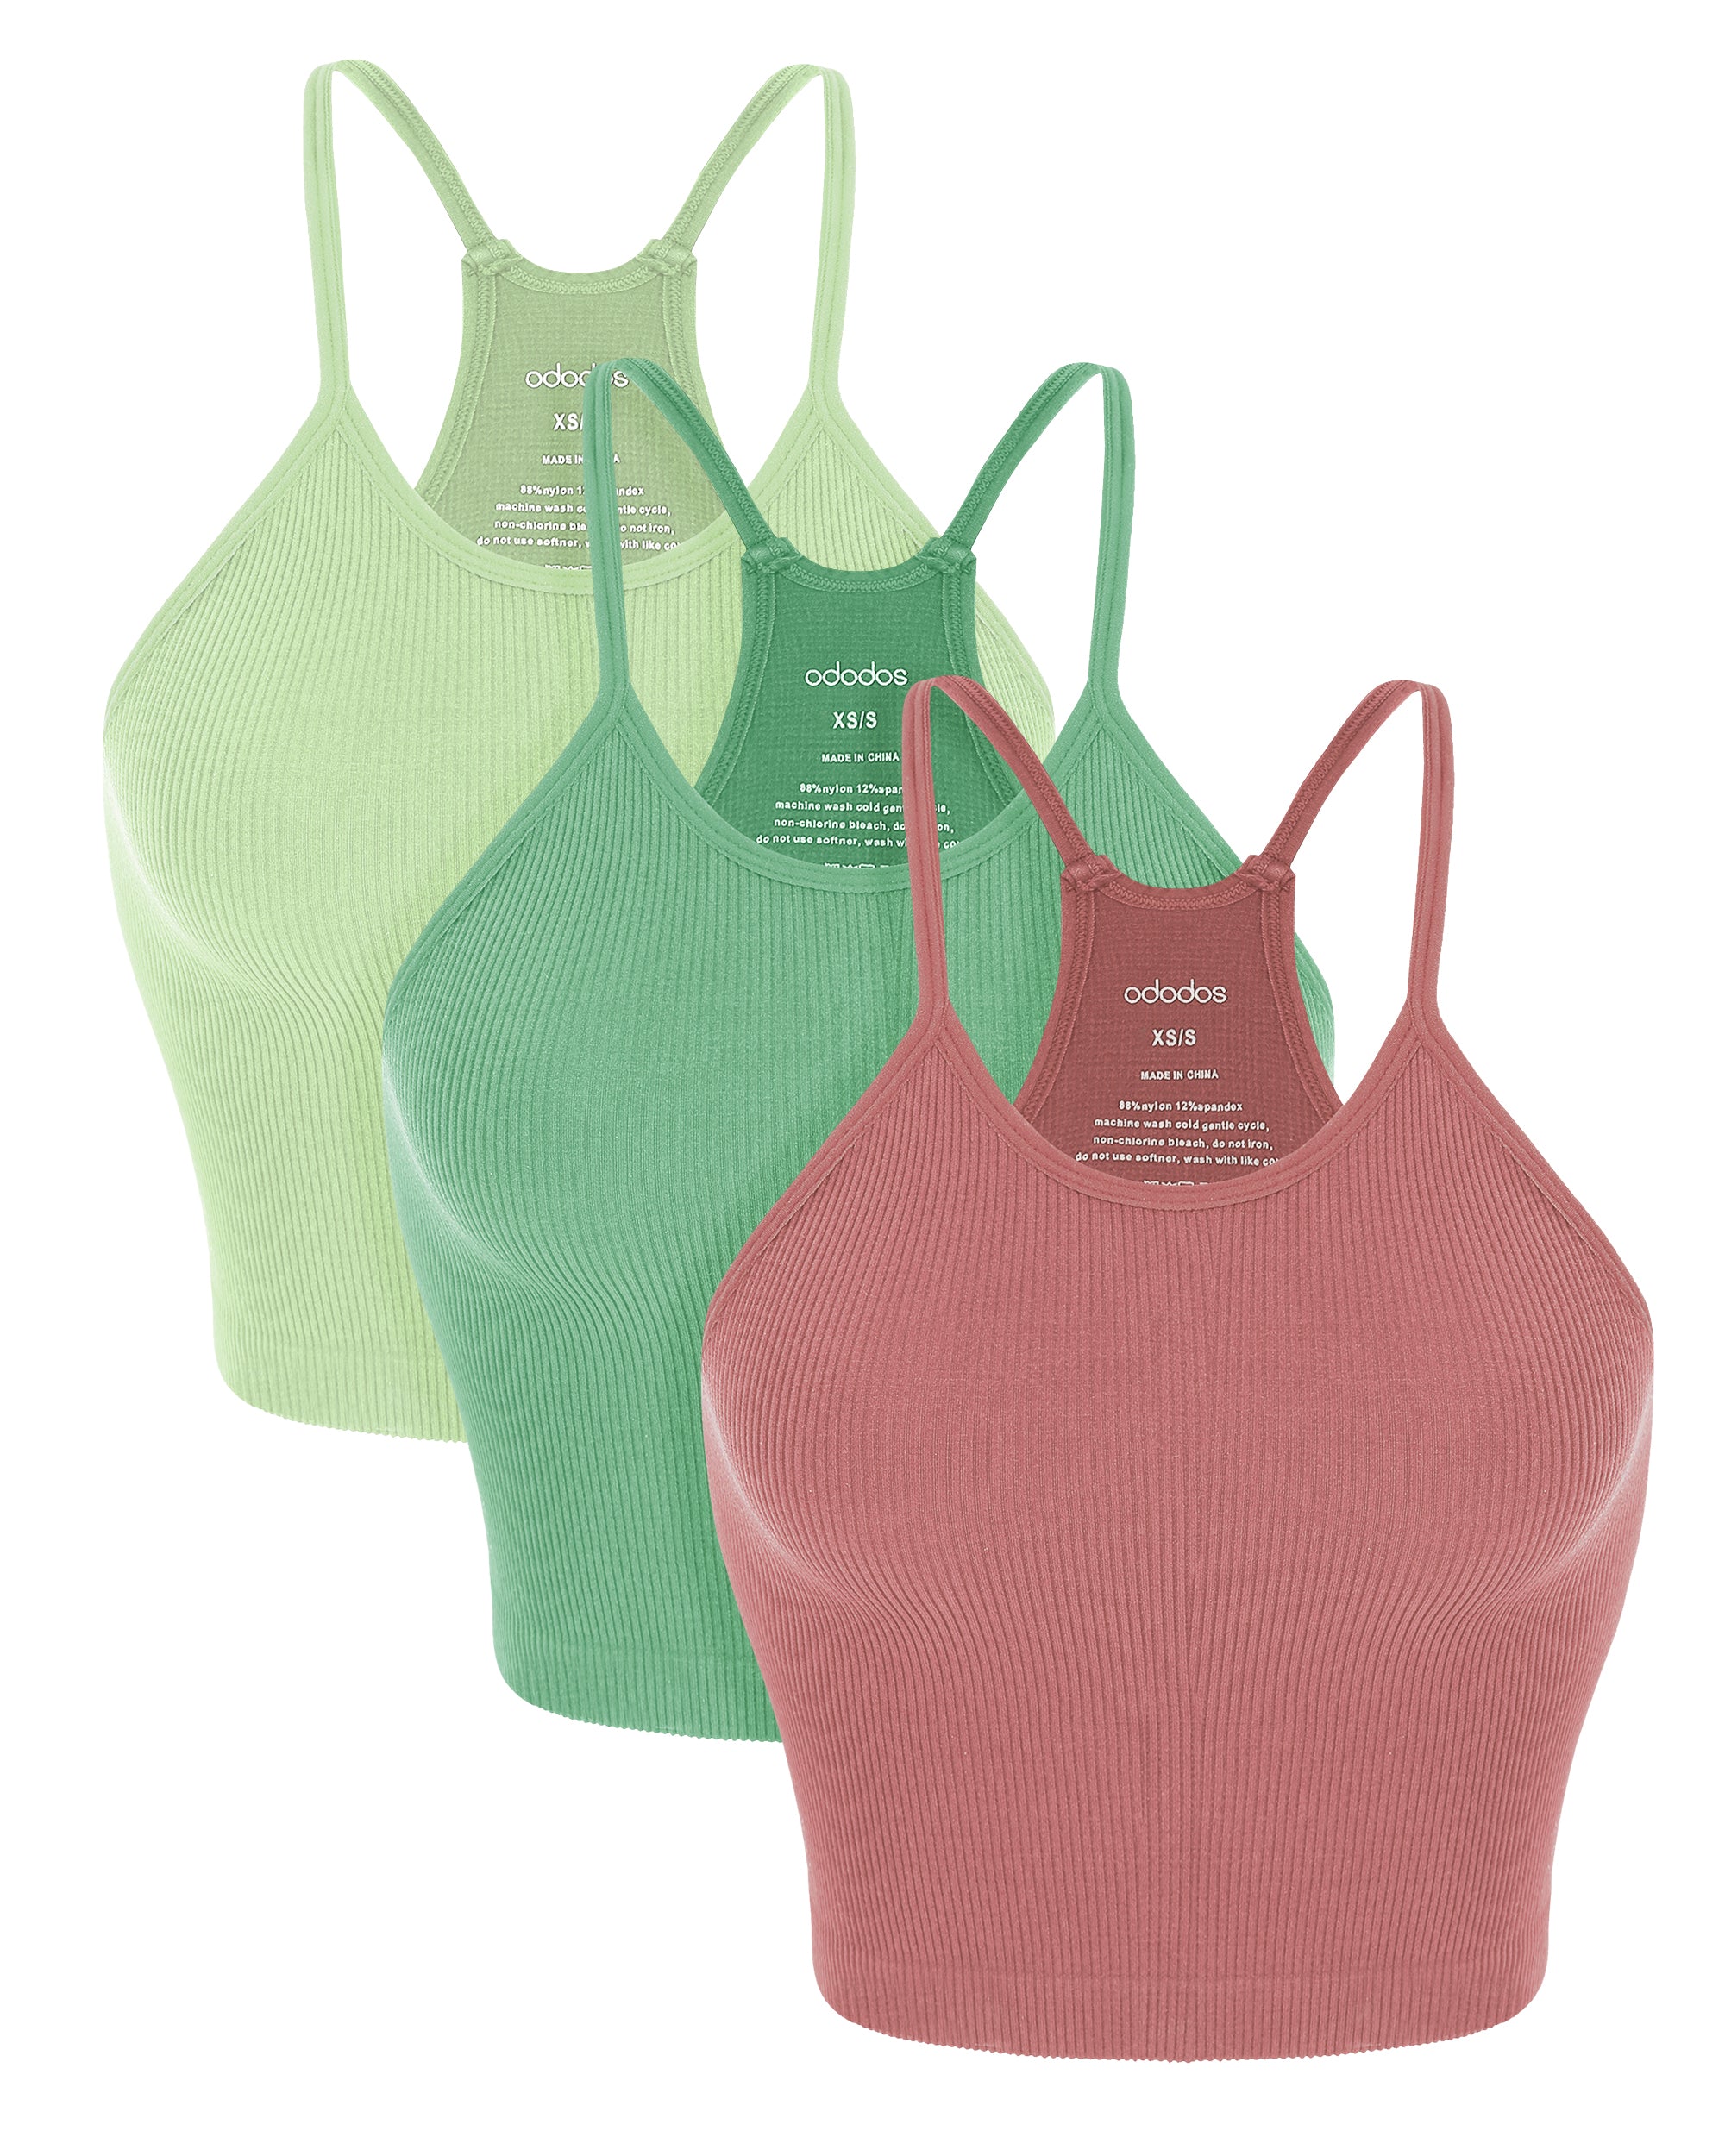 3-Pack Long Seamless Camisole Watermelon+Emerald+Mint - ododos